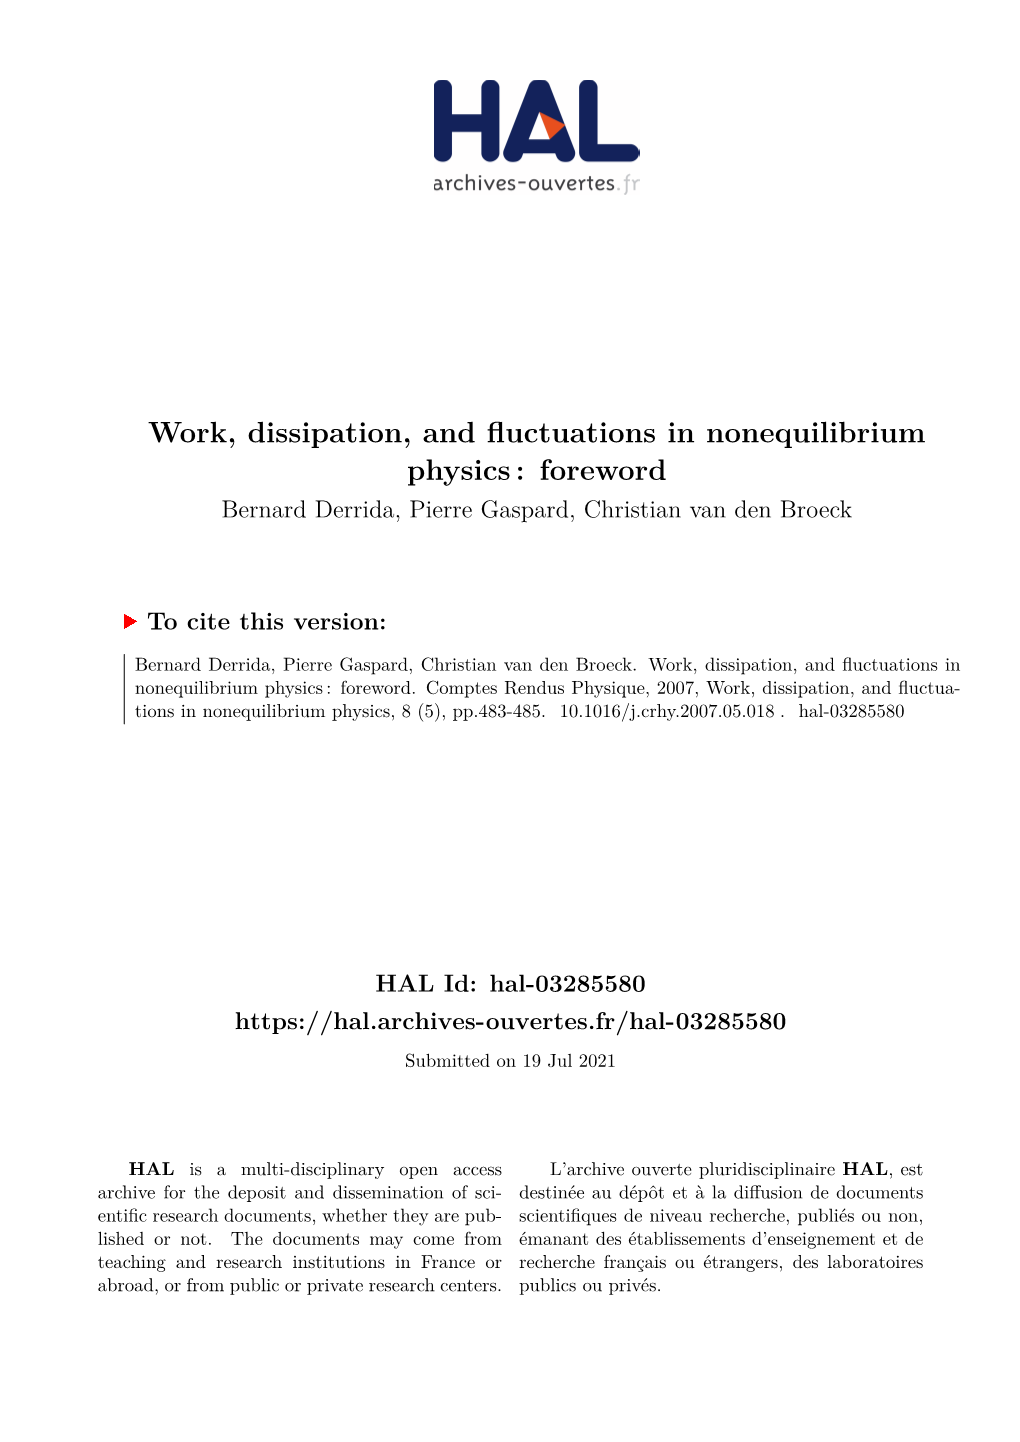 Work, Dissipation, and Fluctuations in Nonequilibrium Physics : Foreword Bernard Derrida, Pierre Gaspard, Christian Van Den Broeck